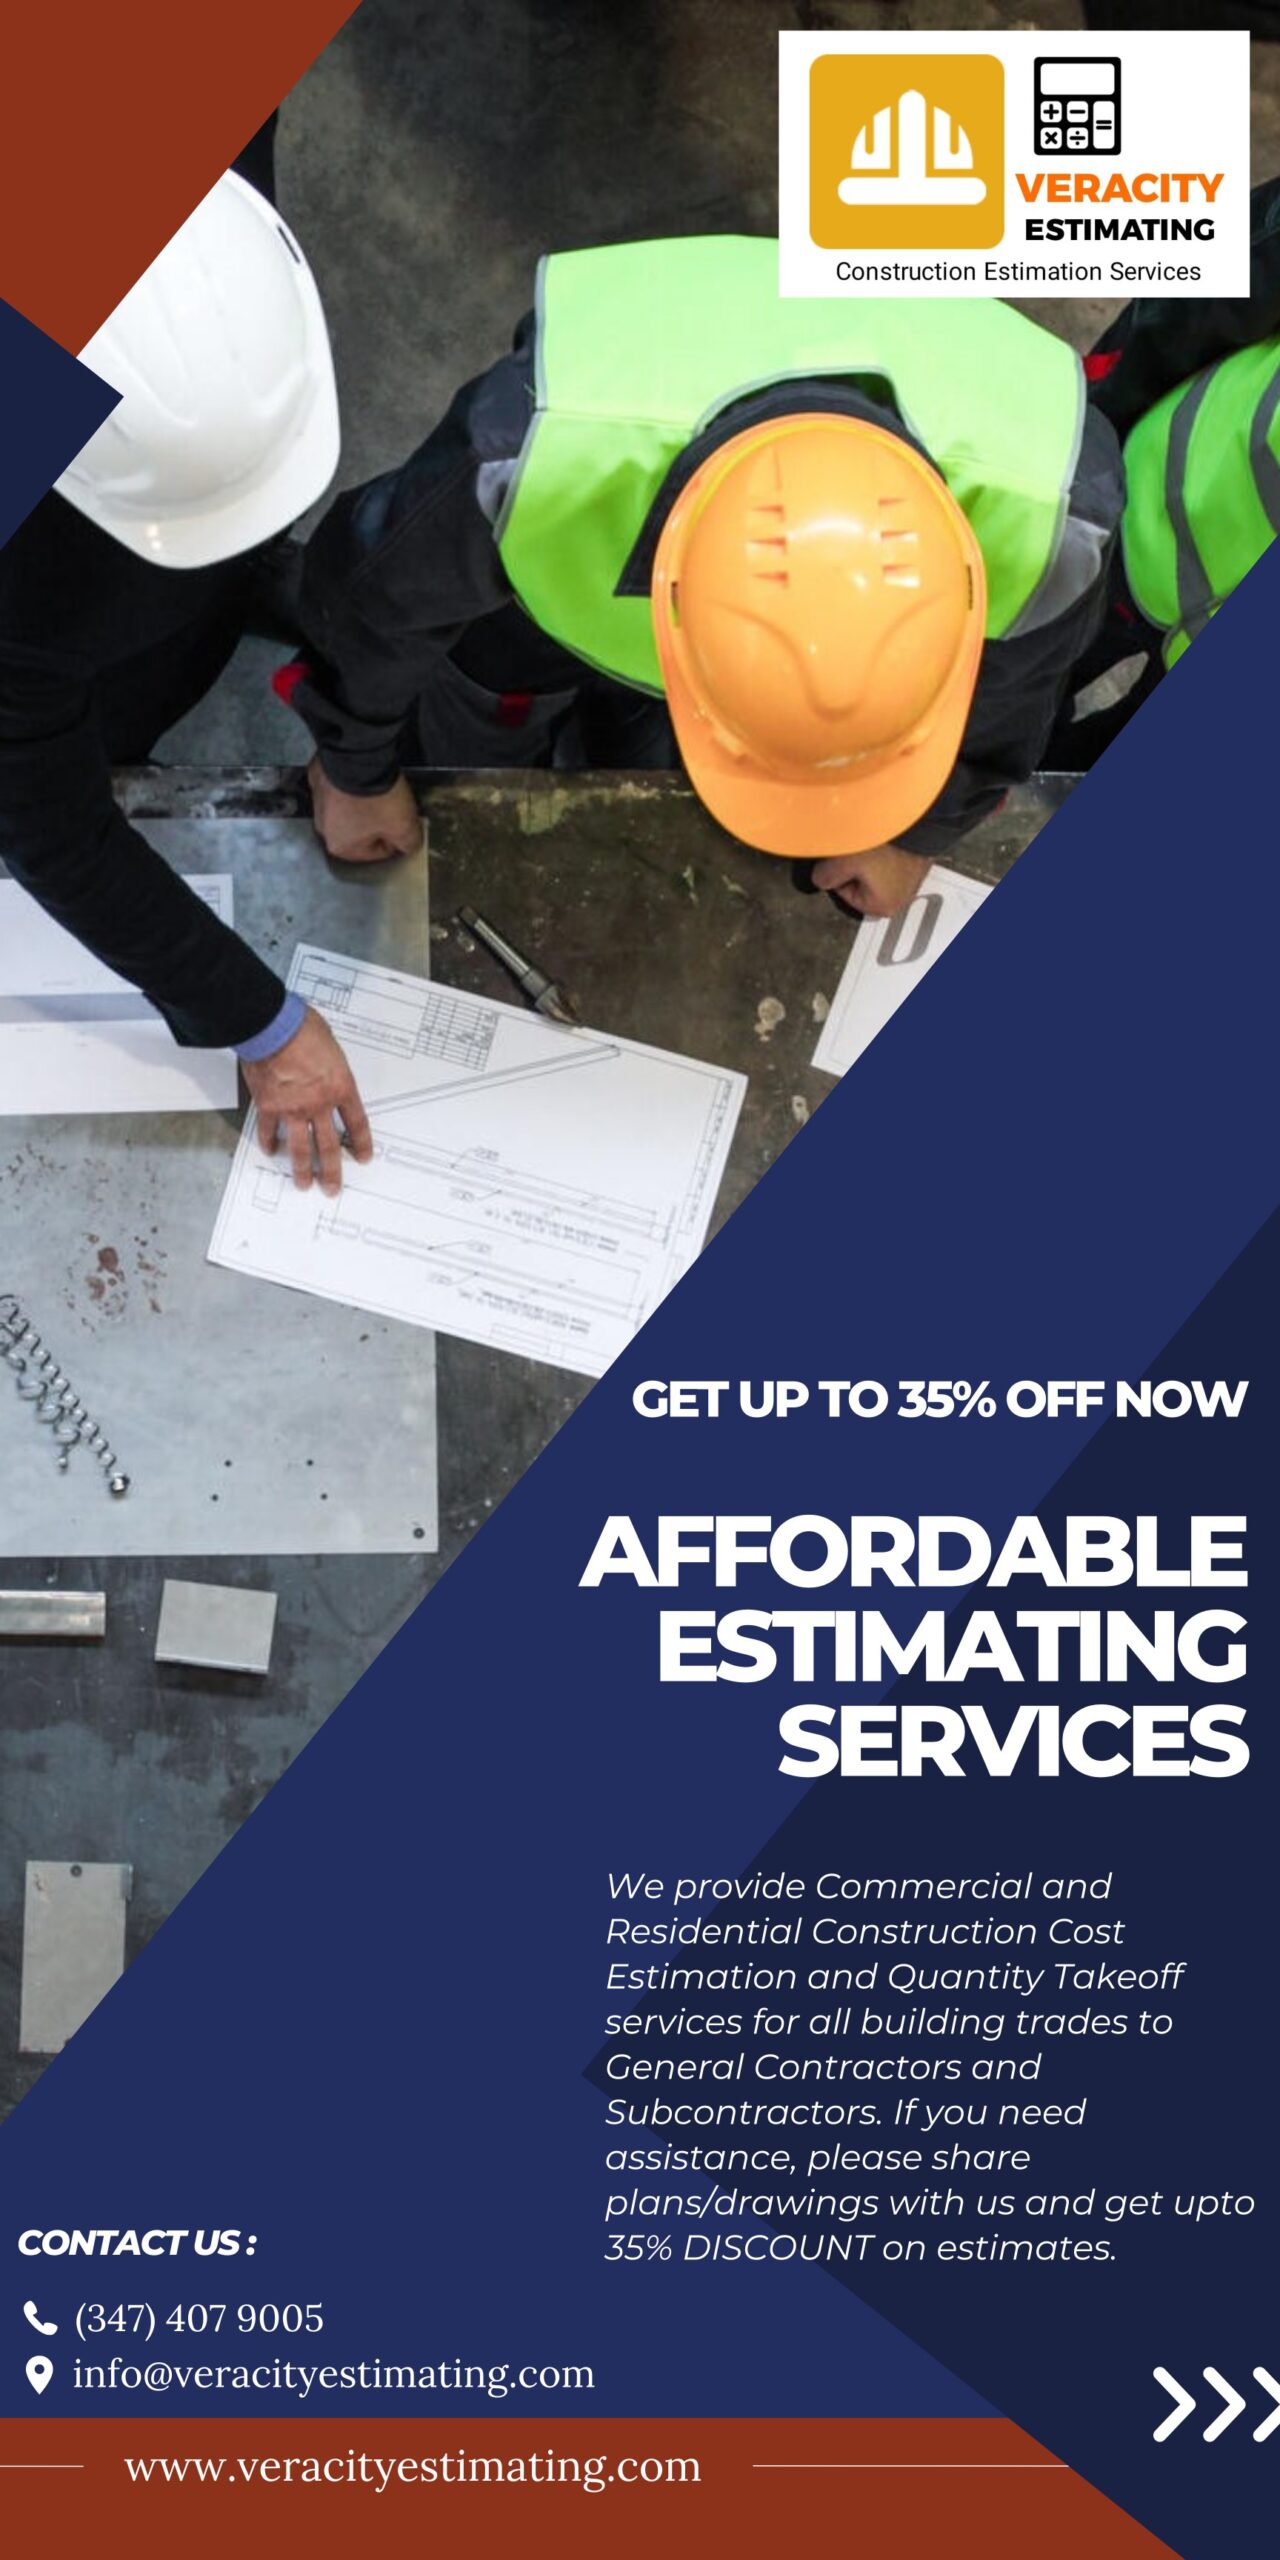 Construction cost and quantity takeoff estimation services